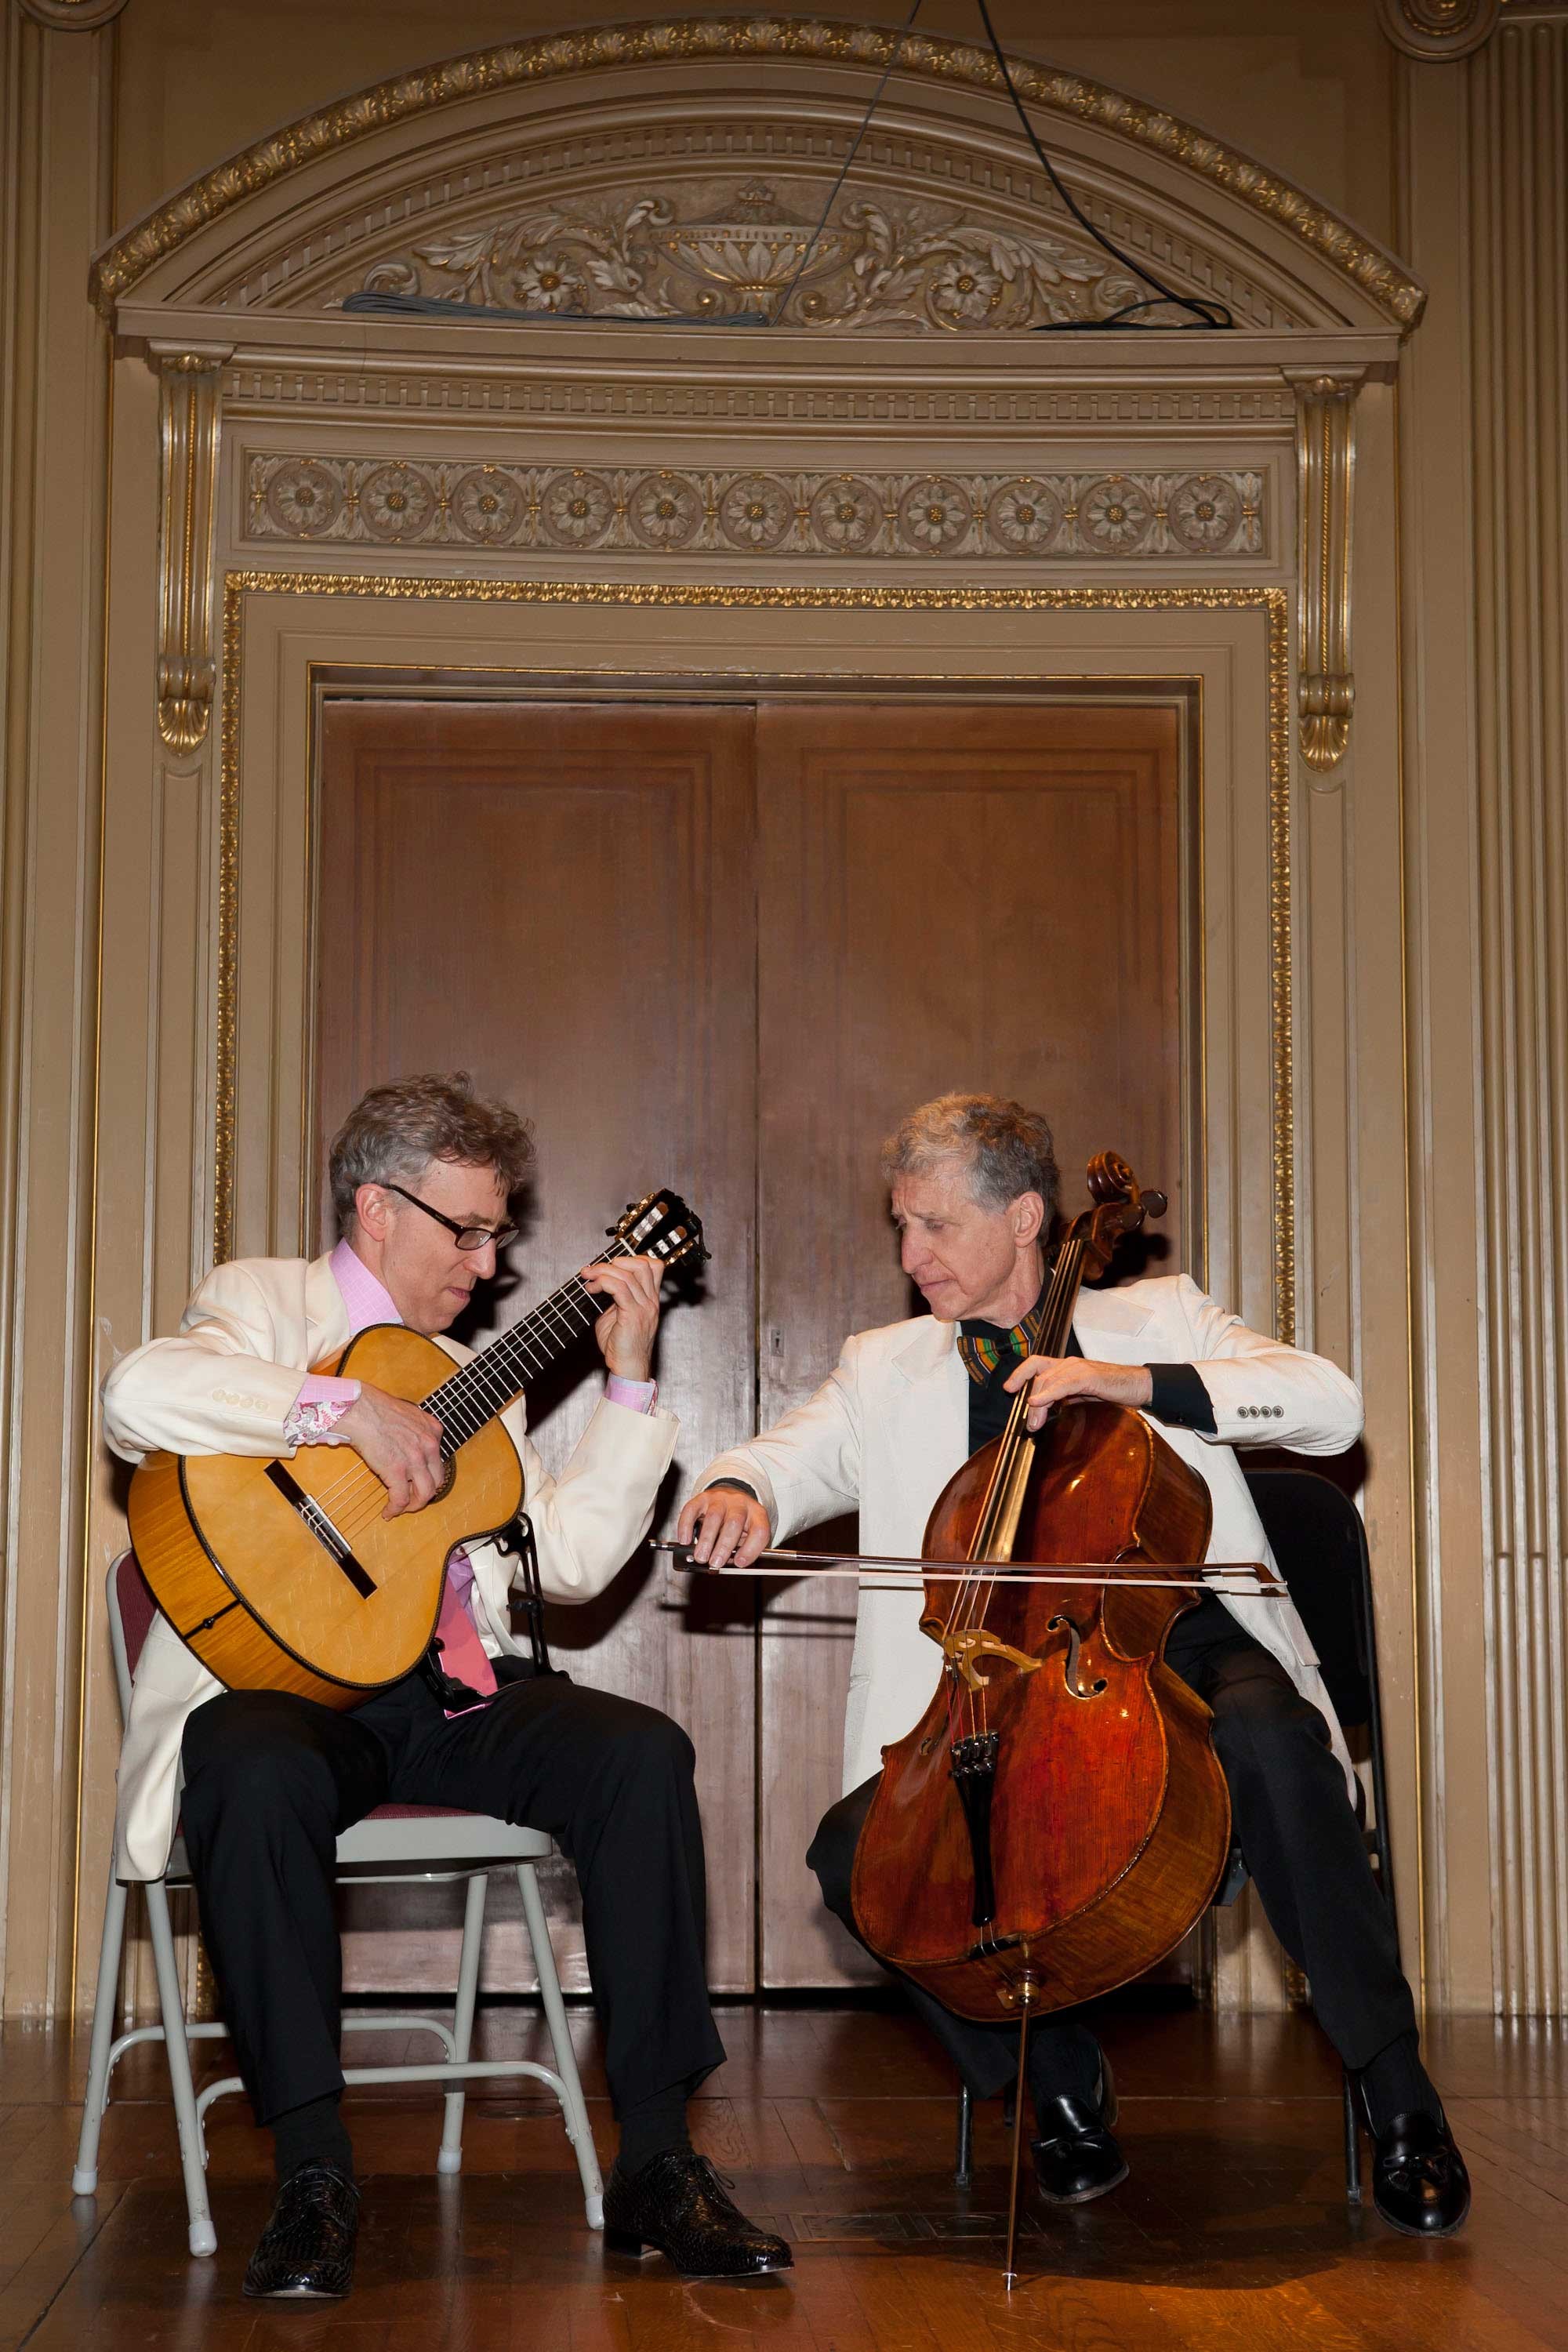 Eliot Fisk and Yehuda Hanani played the Mahaiwe Performing Arts Center on March 23.